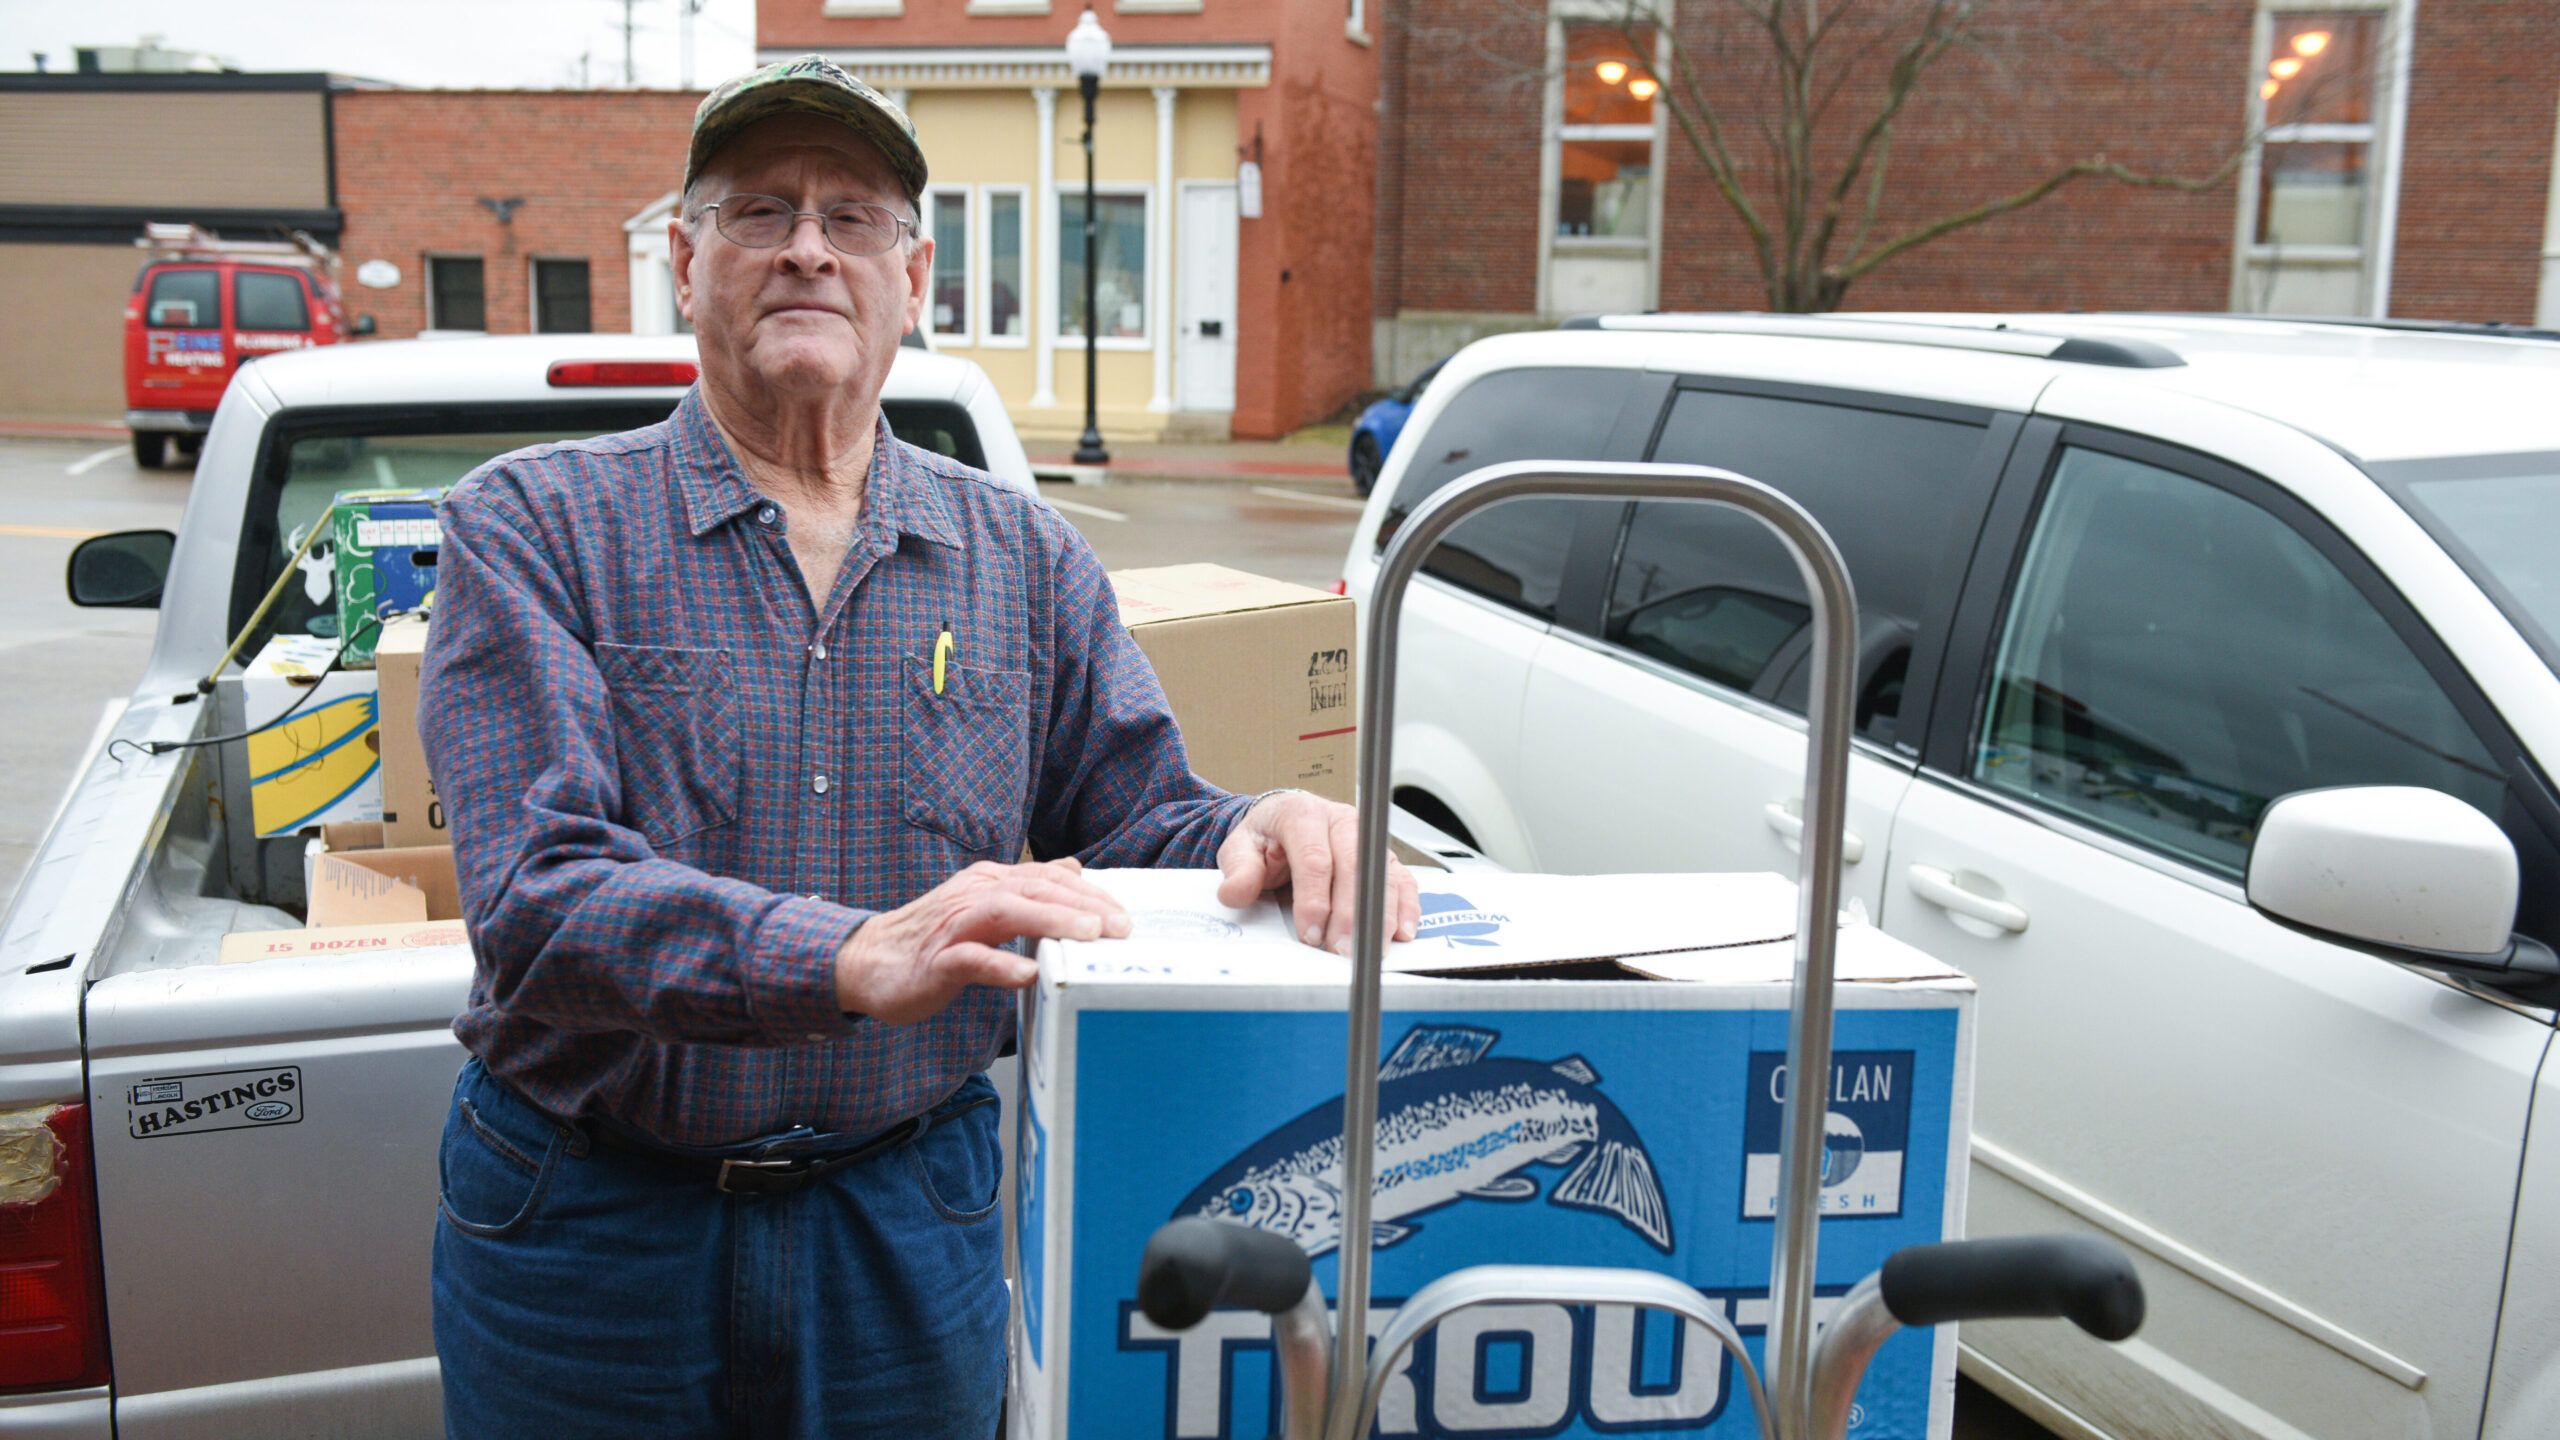 An older adult delivering boxes to a business in a small town